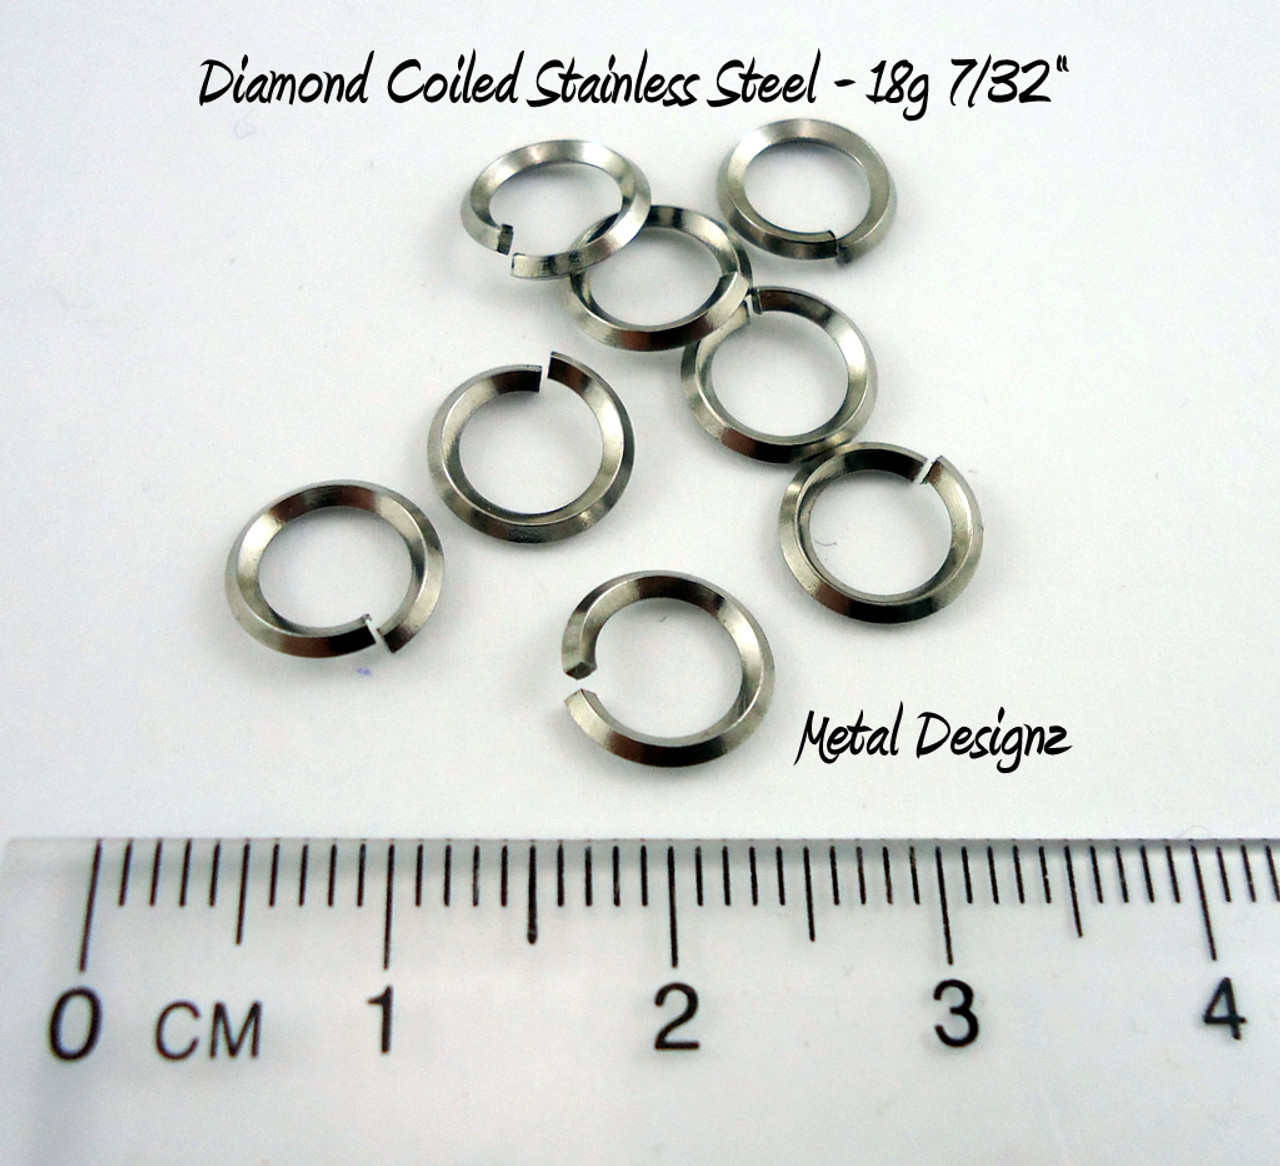 Diamond Coiled Stainless Steel 16g 7/32 - Size for Byzantine - rings